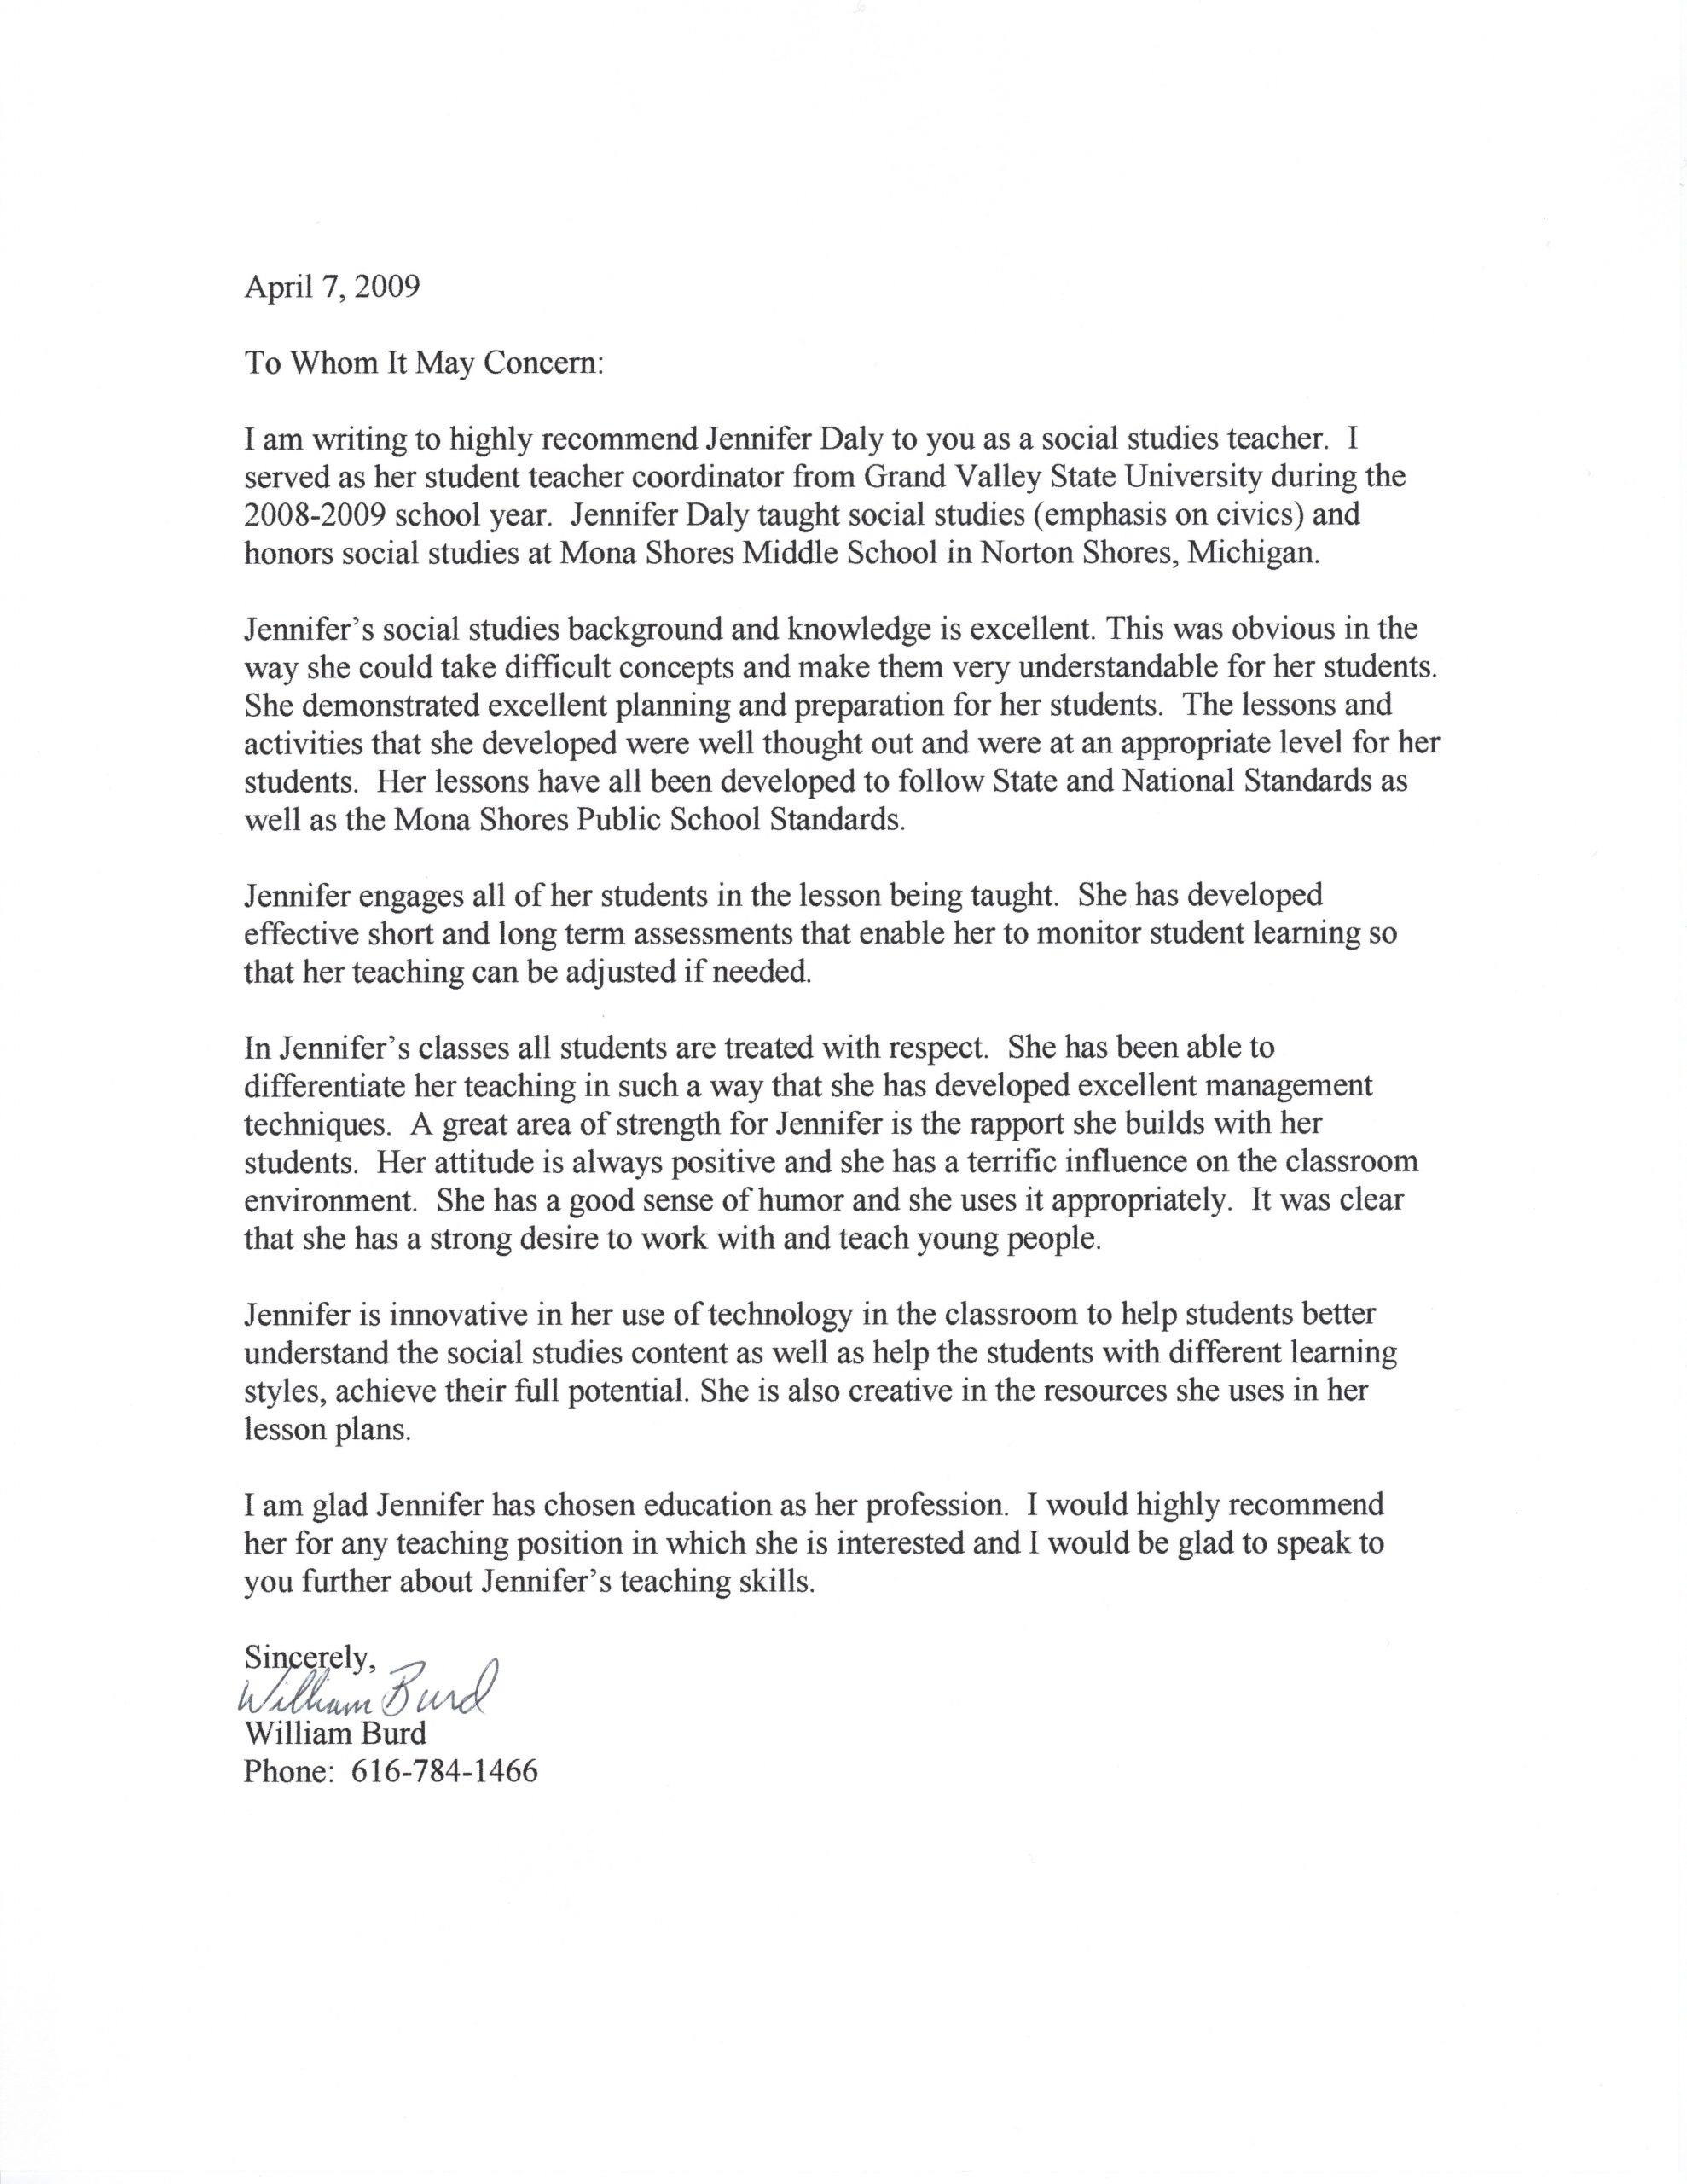 Student Teacher Recommendation Letter Examples Letter Of with sizing 5100 X 6600